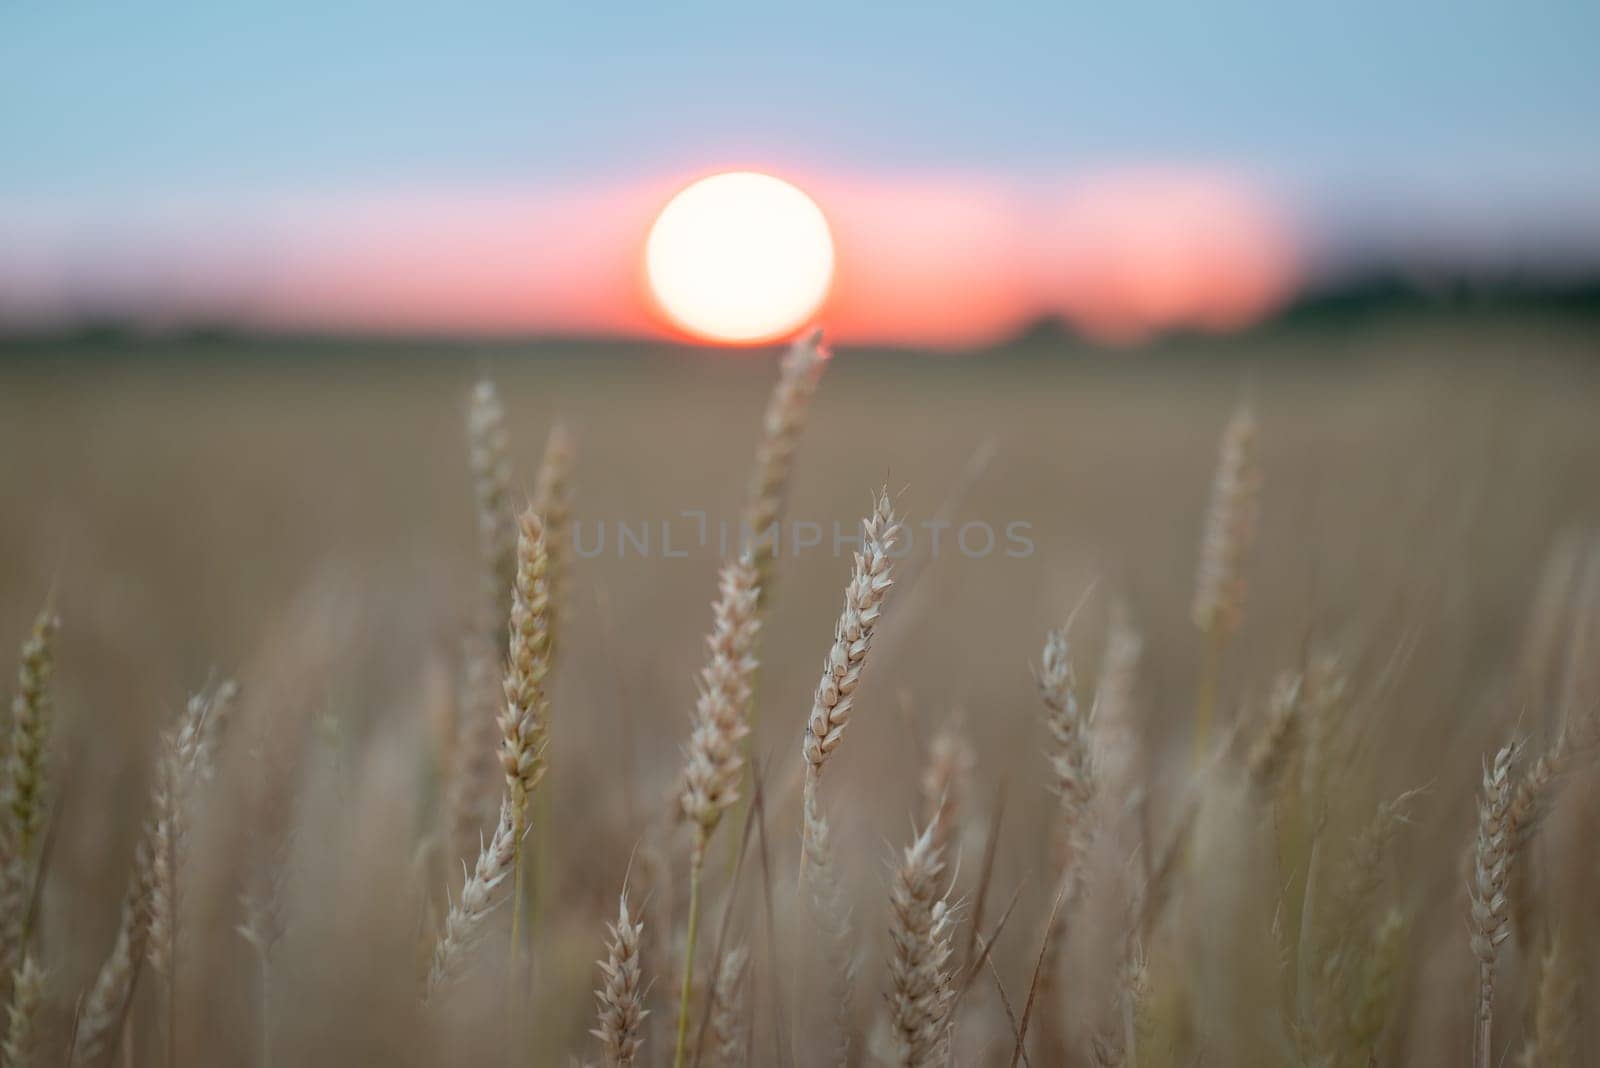 Landscape of wheat field with big golden sun, colorful sky on the horizon